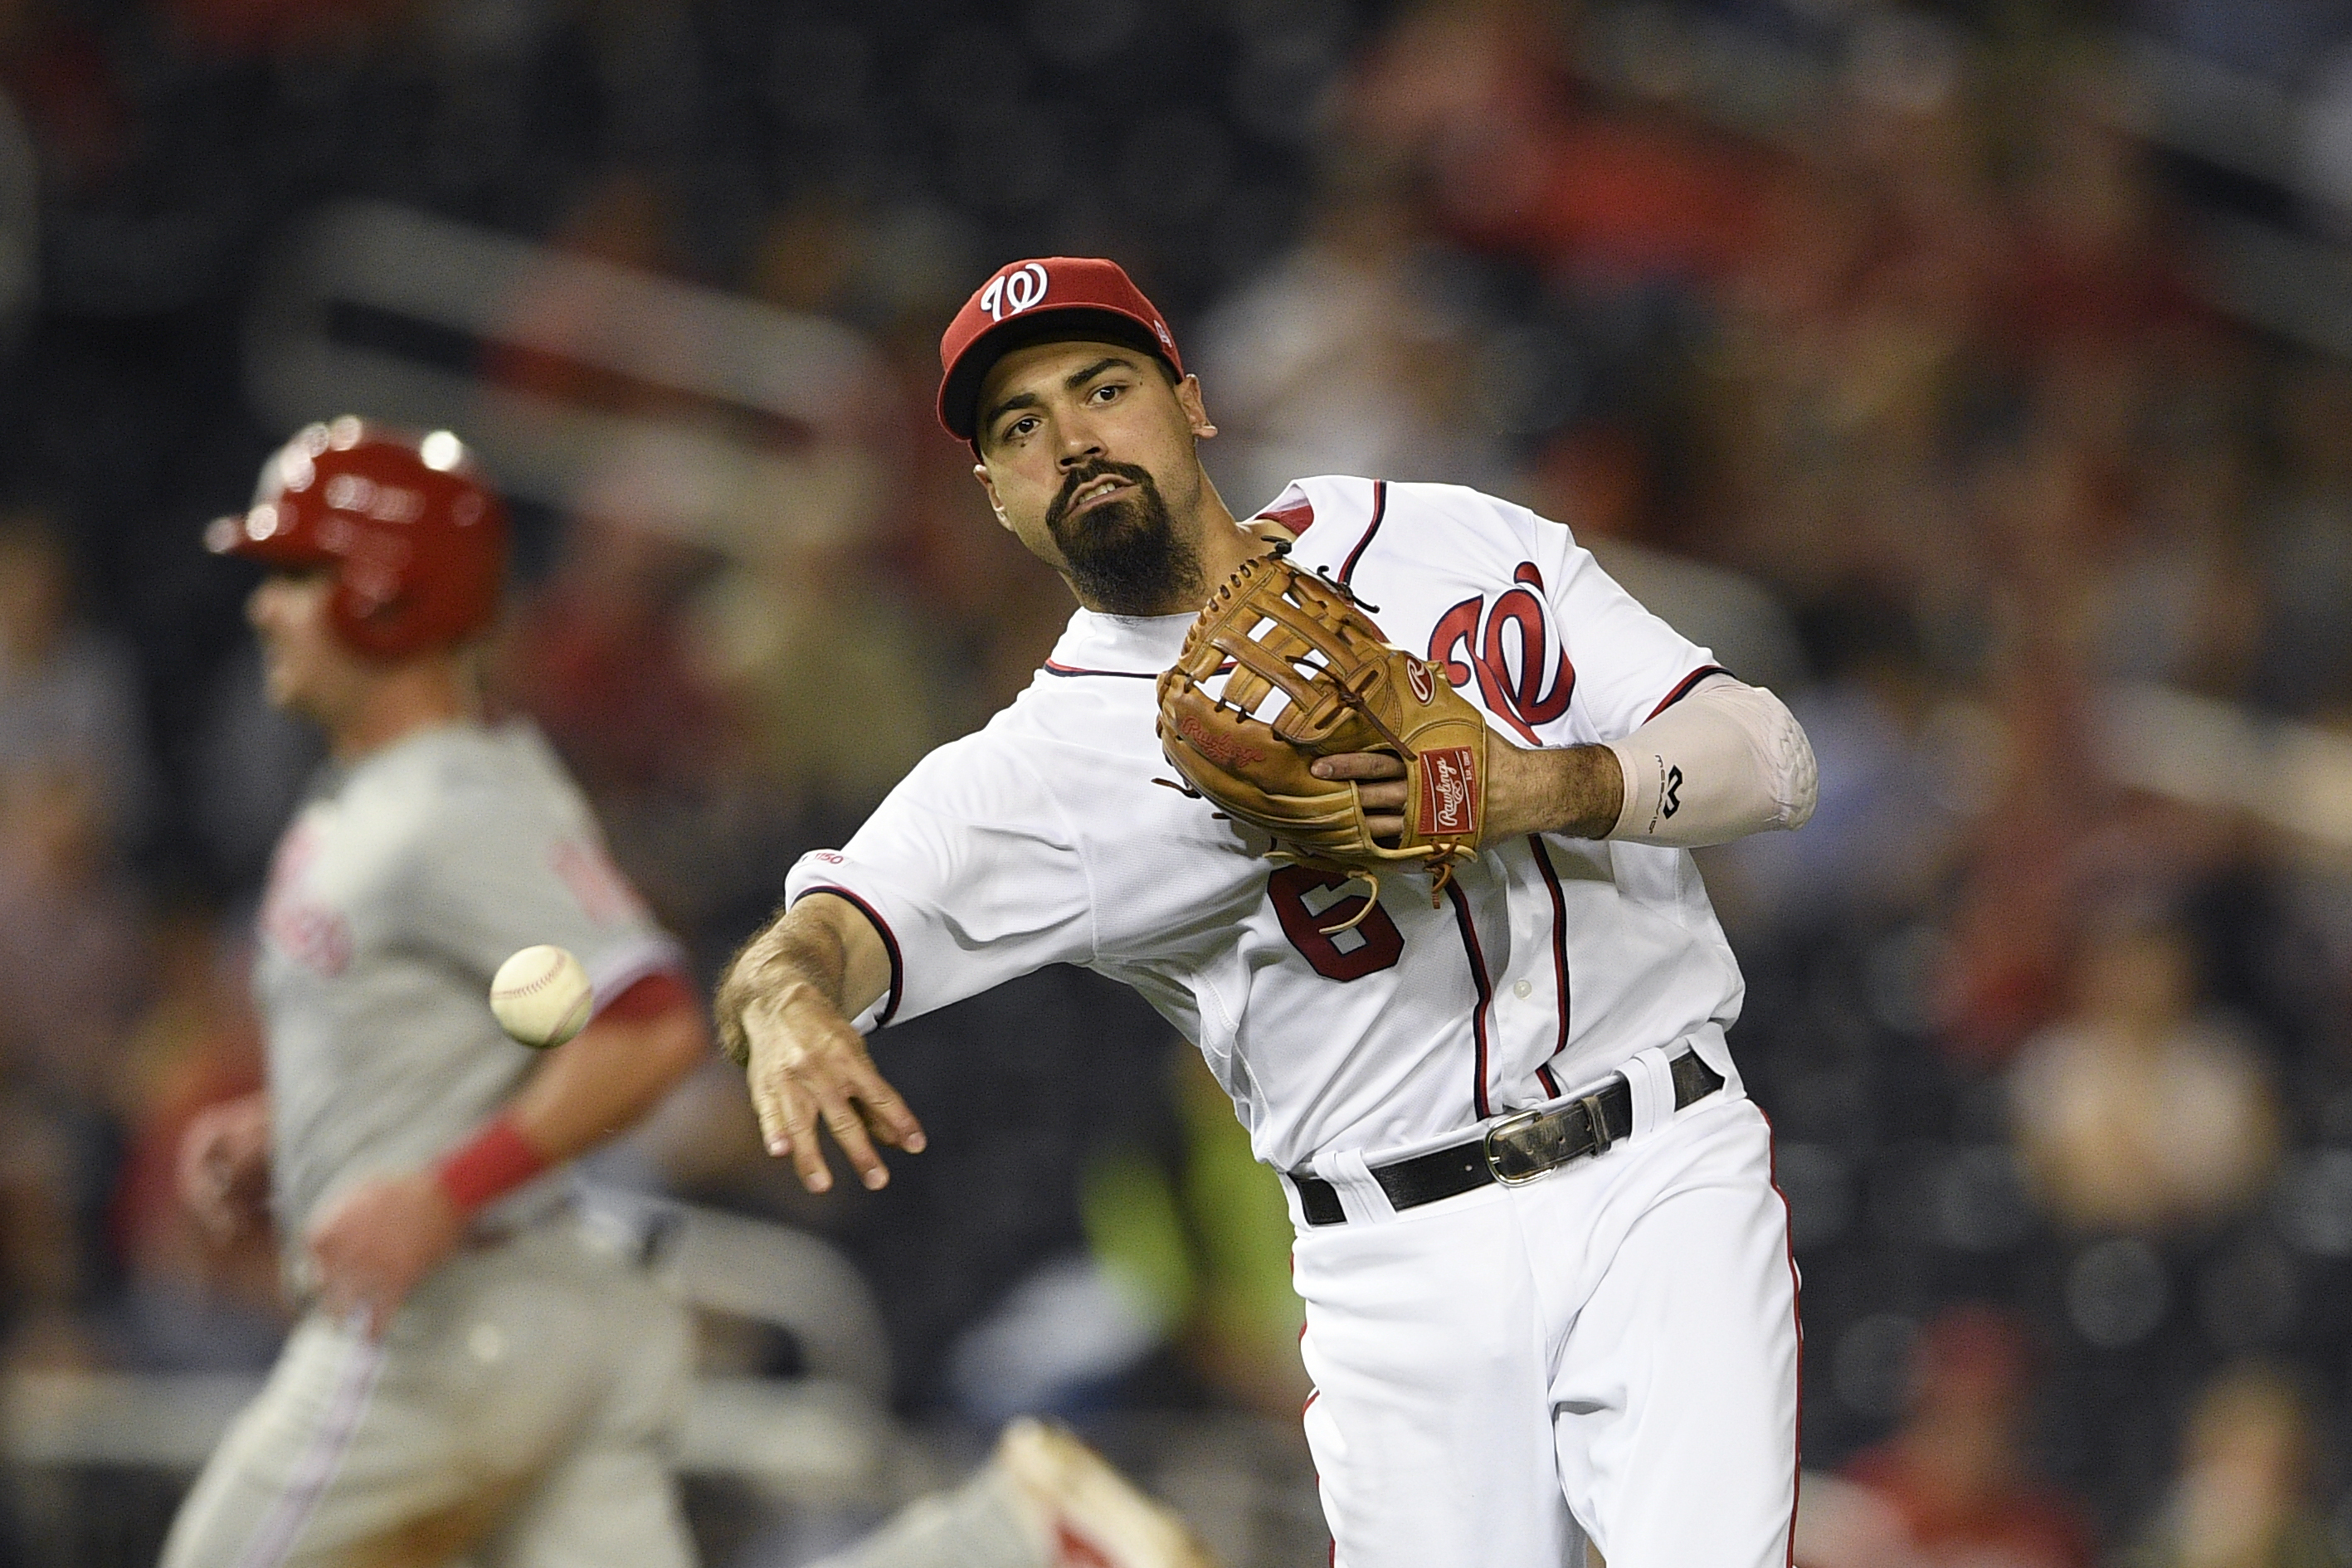 Report: Nationals offer Anthony Rendon $210-215 million deal - NBC Sports